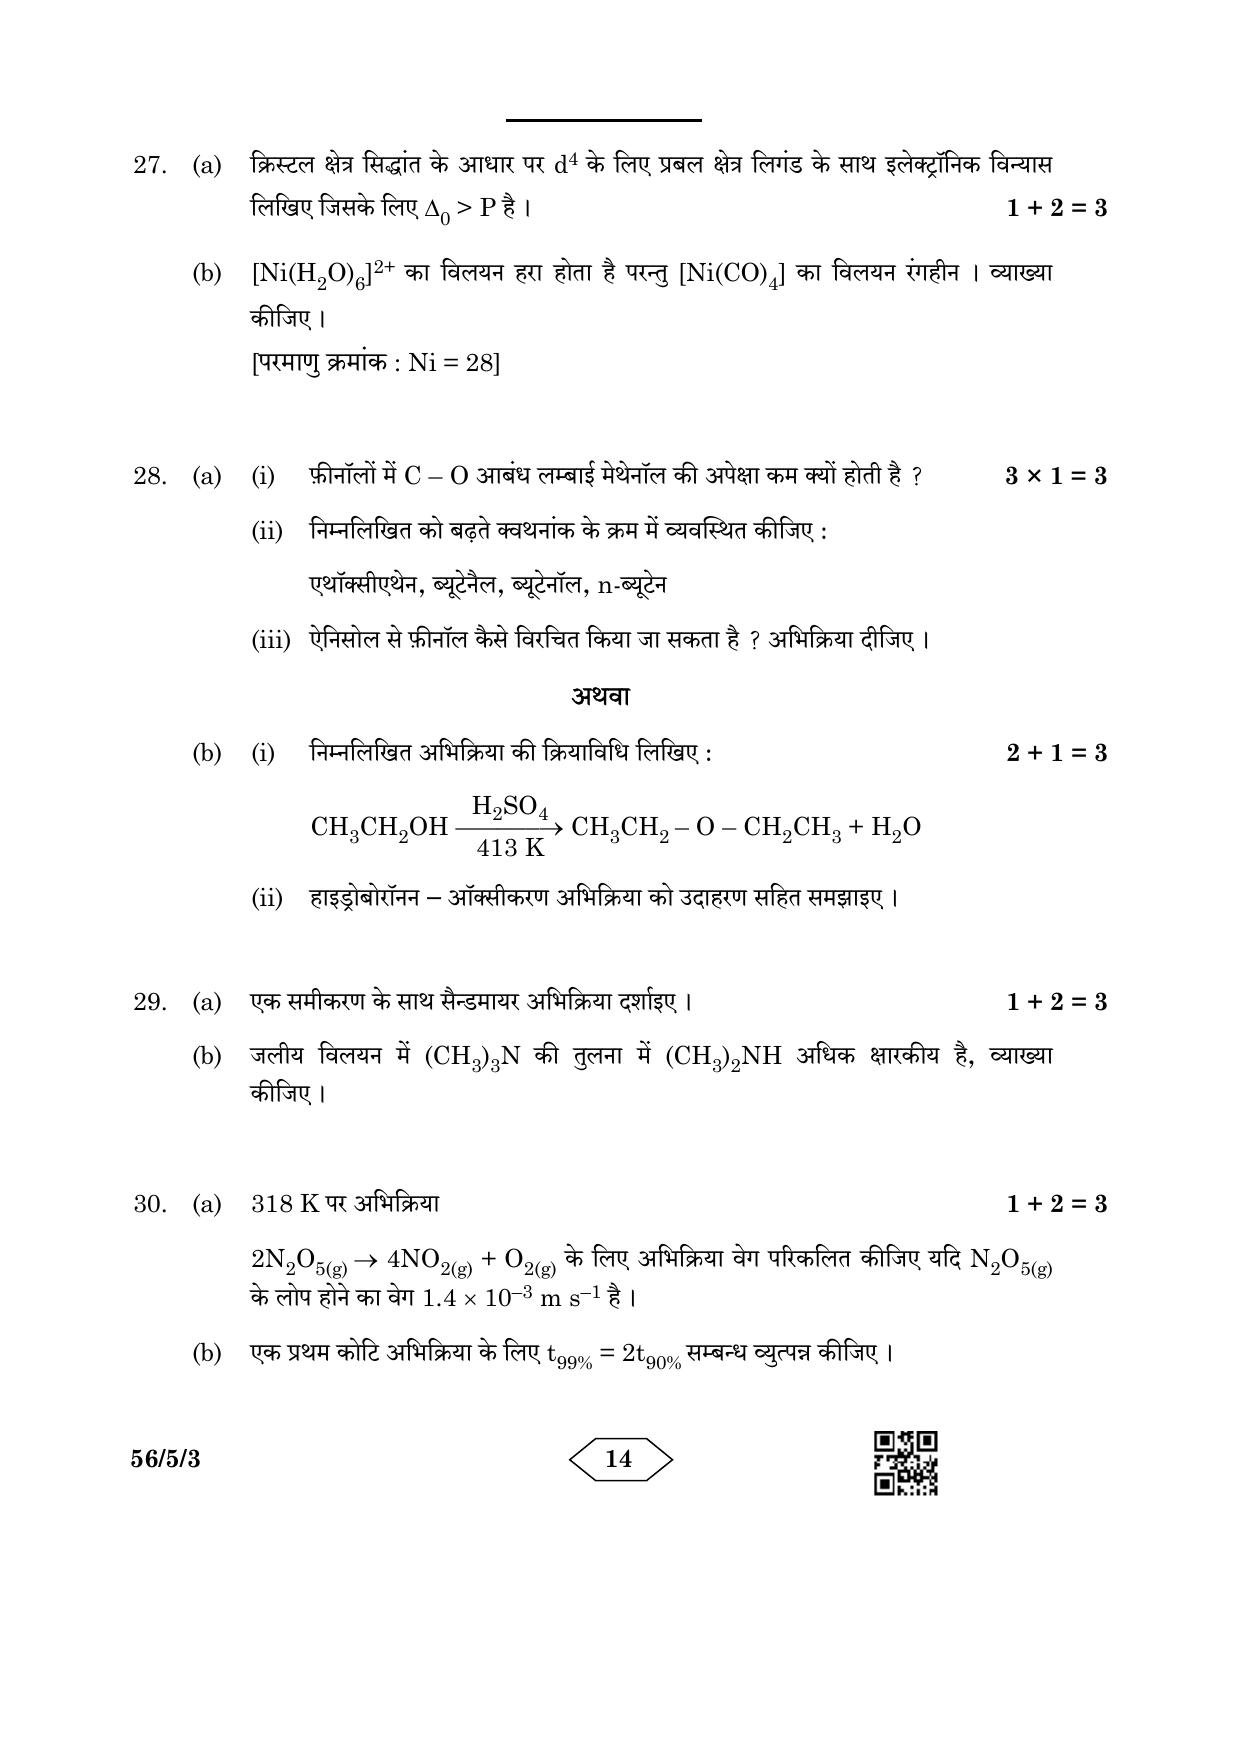 CBSE Class 12 56-5-3 Chemistry 2023 Question Paper - Page 14